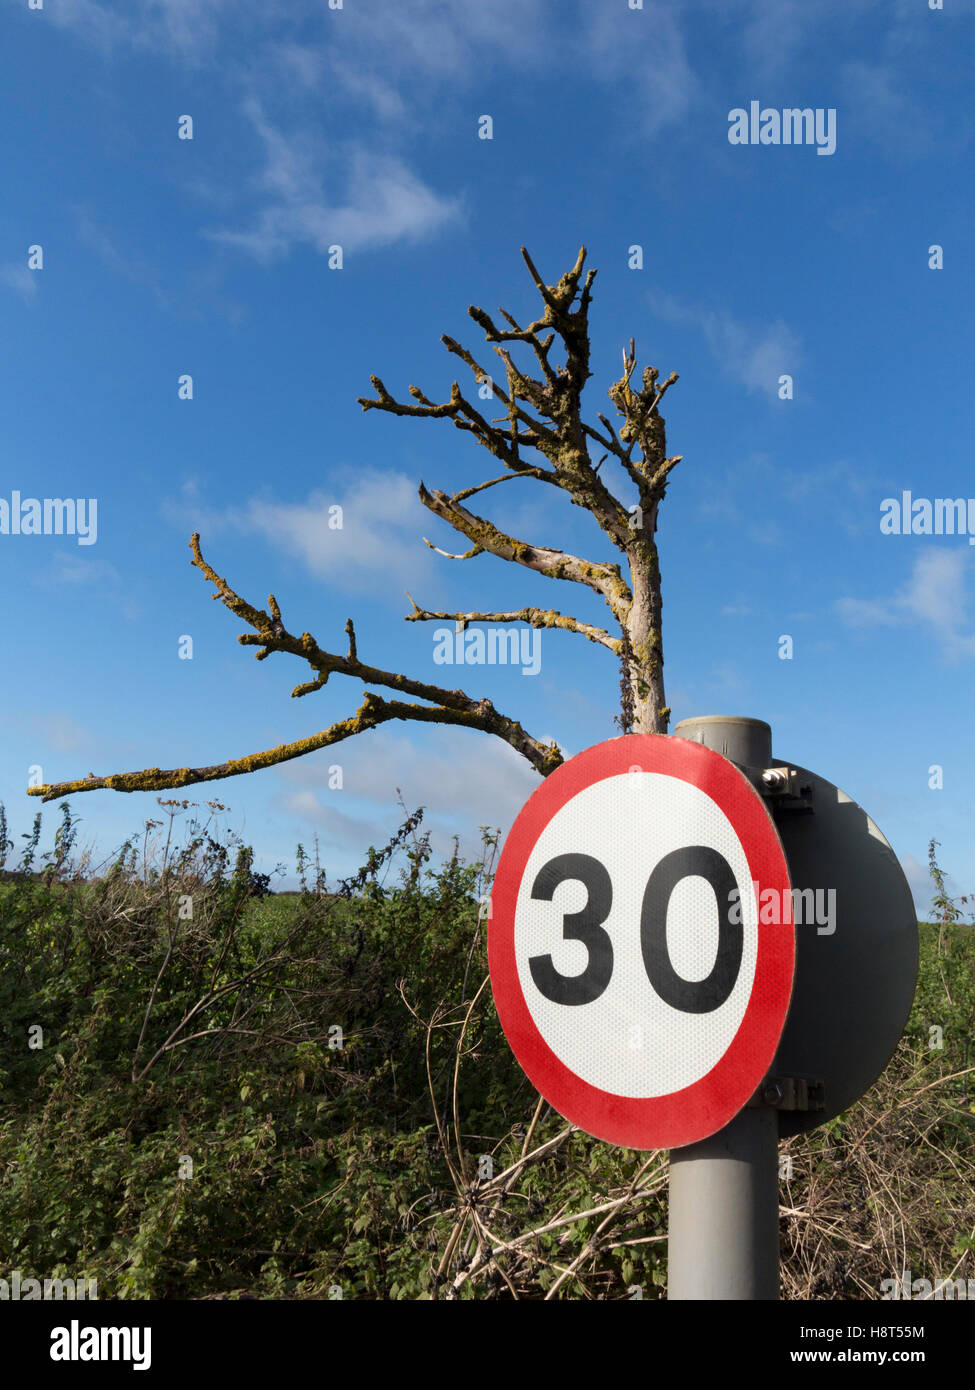 Thirty miles per hour circular road sign on a short pole behind a dead tree against a blue sky Stock Photo